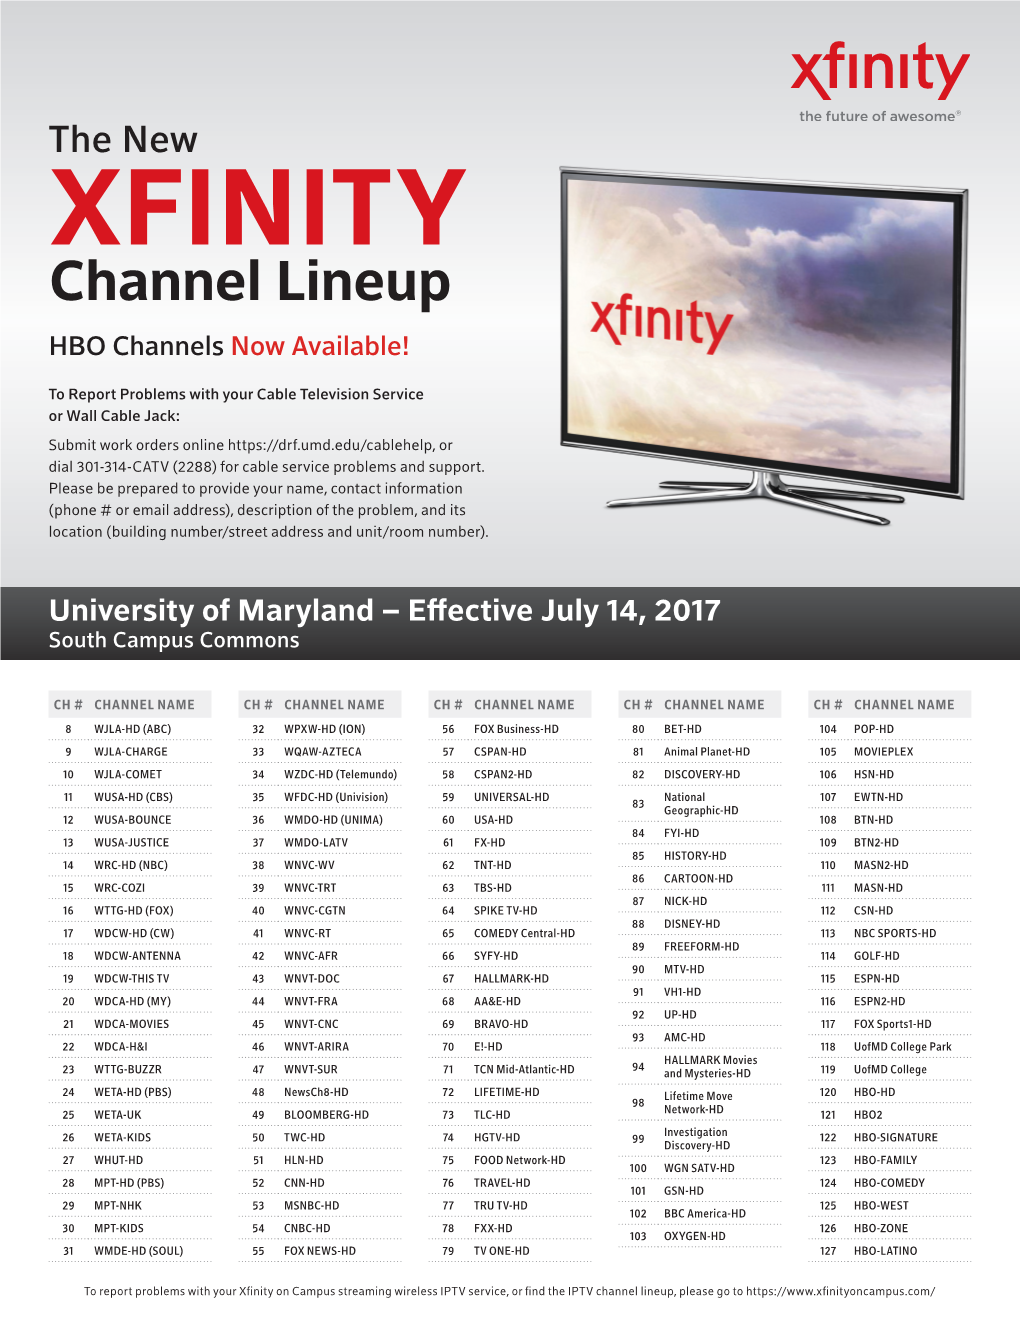 XFINITY Channel Lineup HBO Channels Now Available!